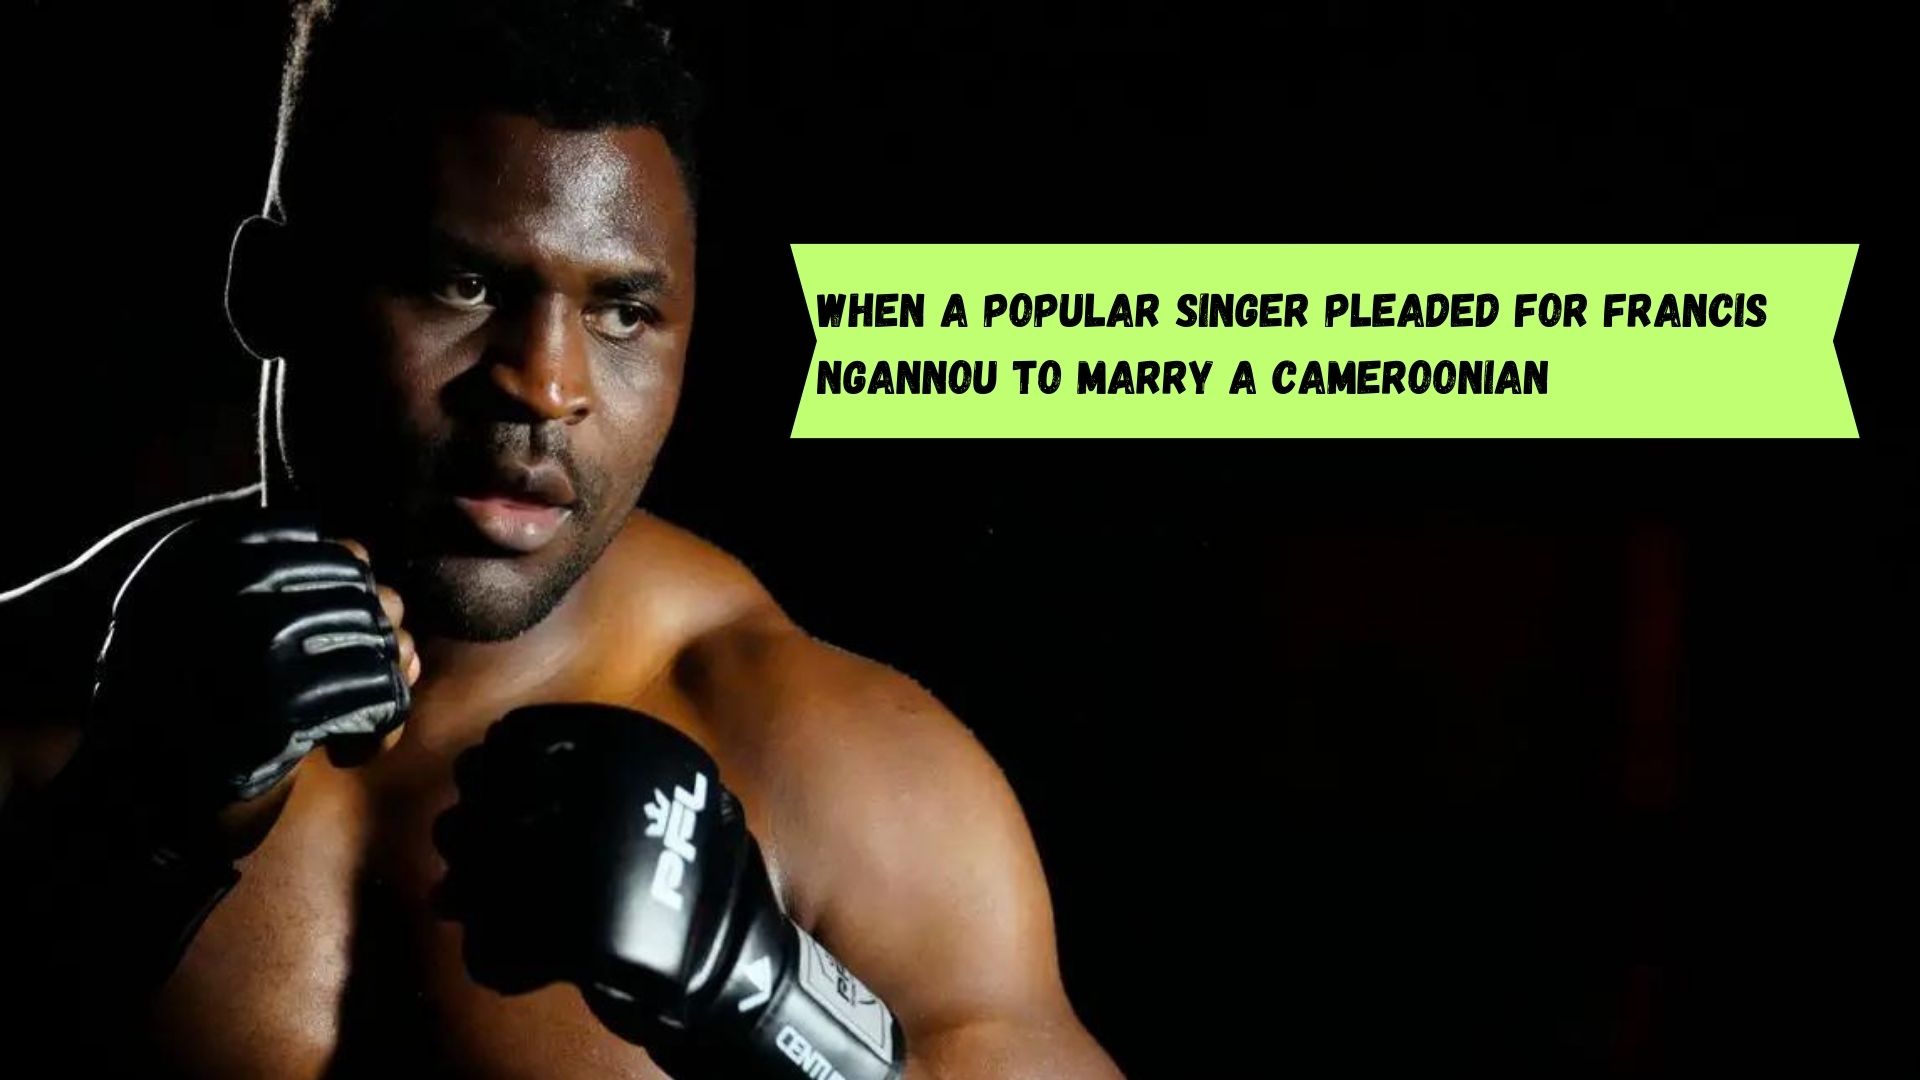 When a Popular Singer Pleaded for Francis Ngannou to Marry a Cameroonian